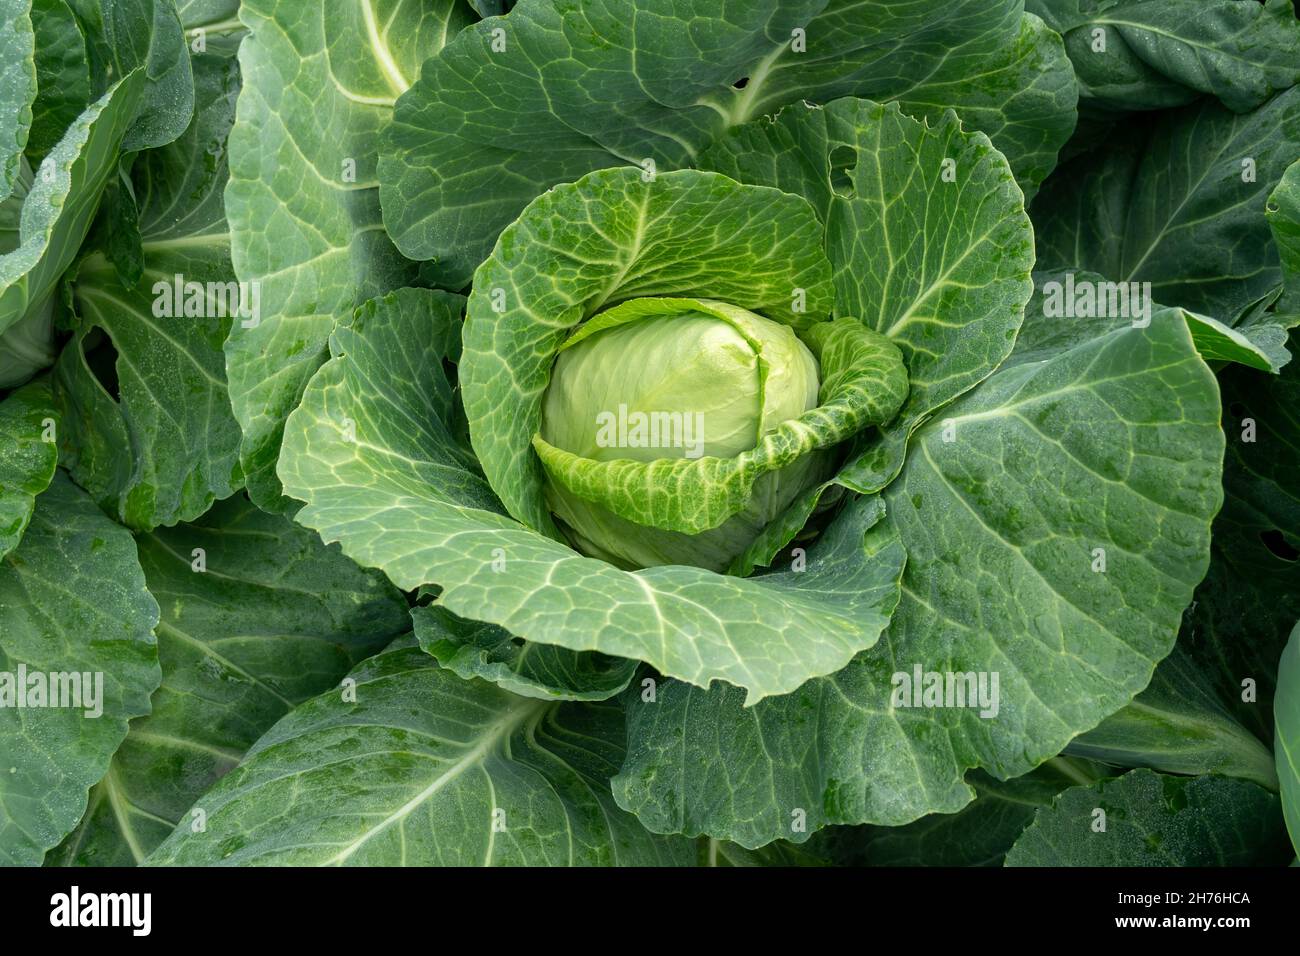 A head of early cabbage of the Tochka variety has ripened in a garden bed. Stock Photo